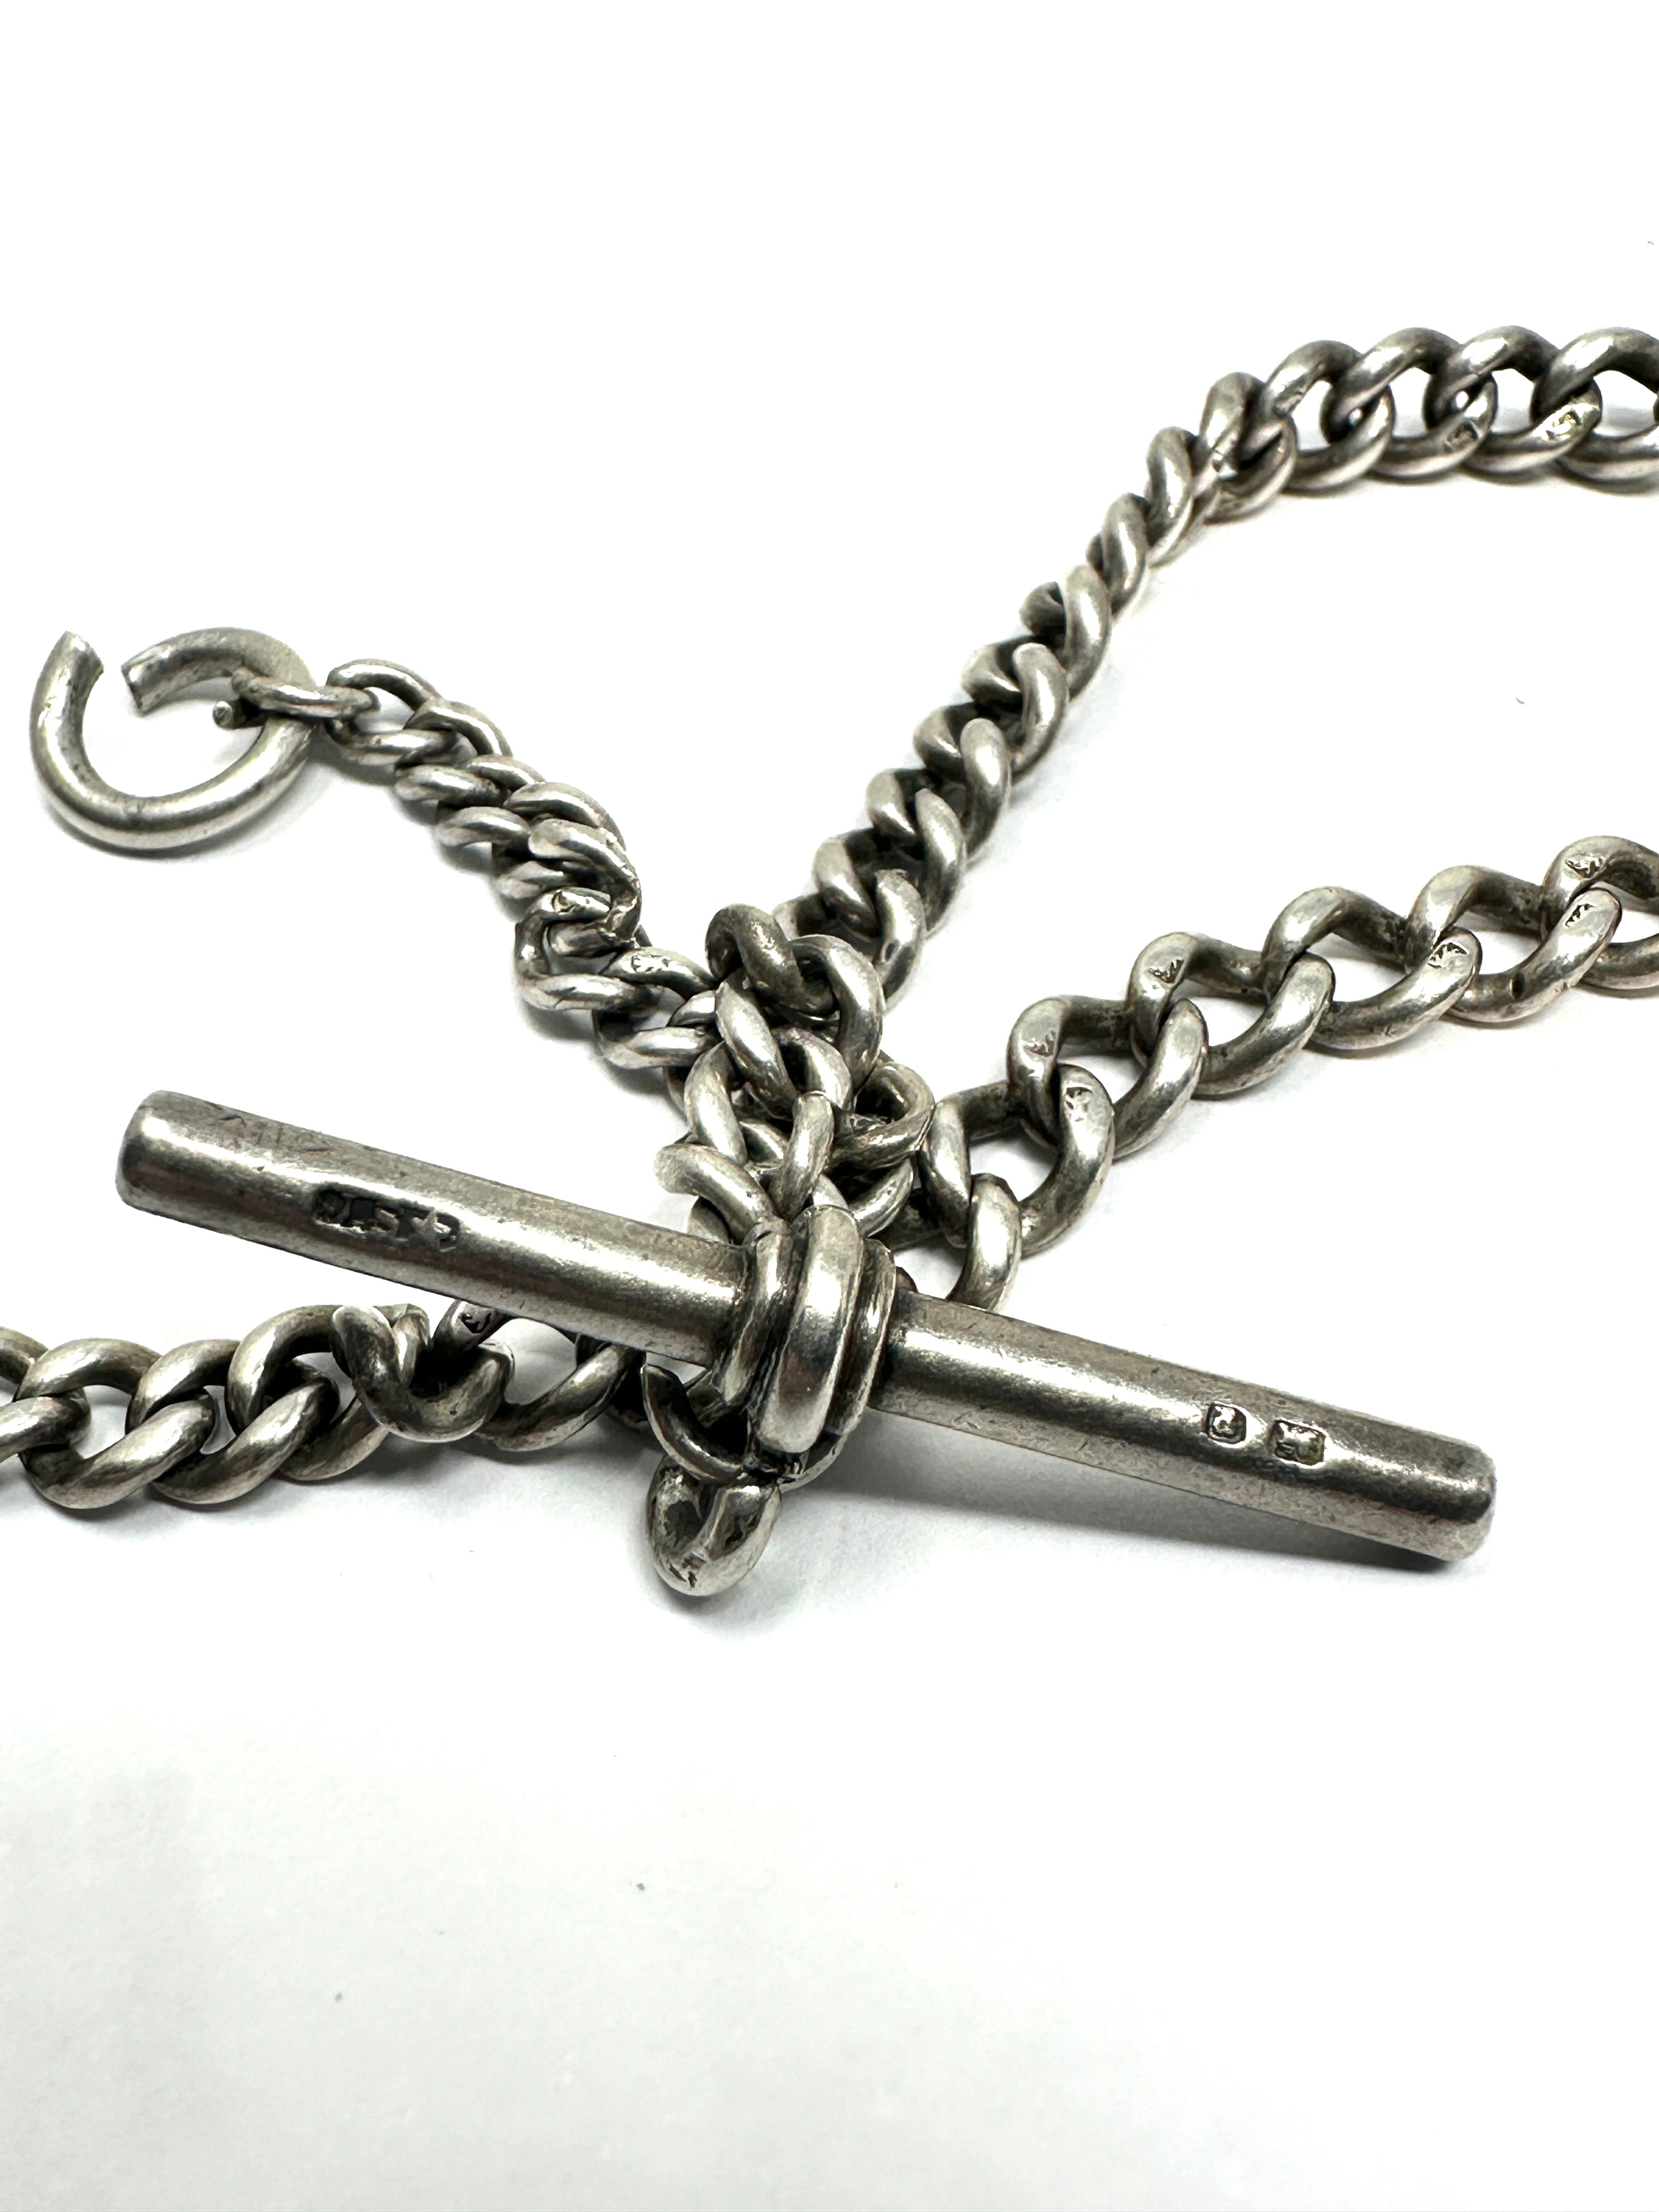 Antique silver albert watch chain weight approx 22g no clip - Image 2 of 2